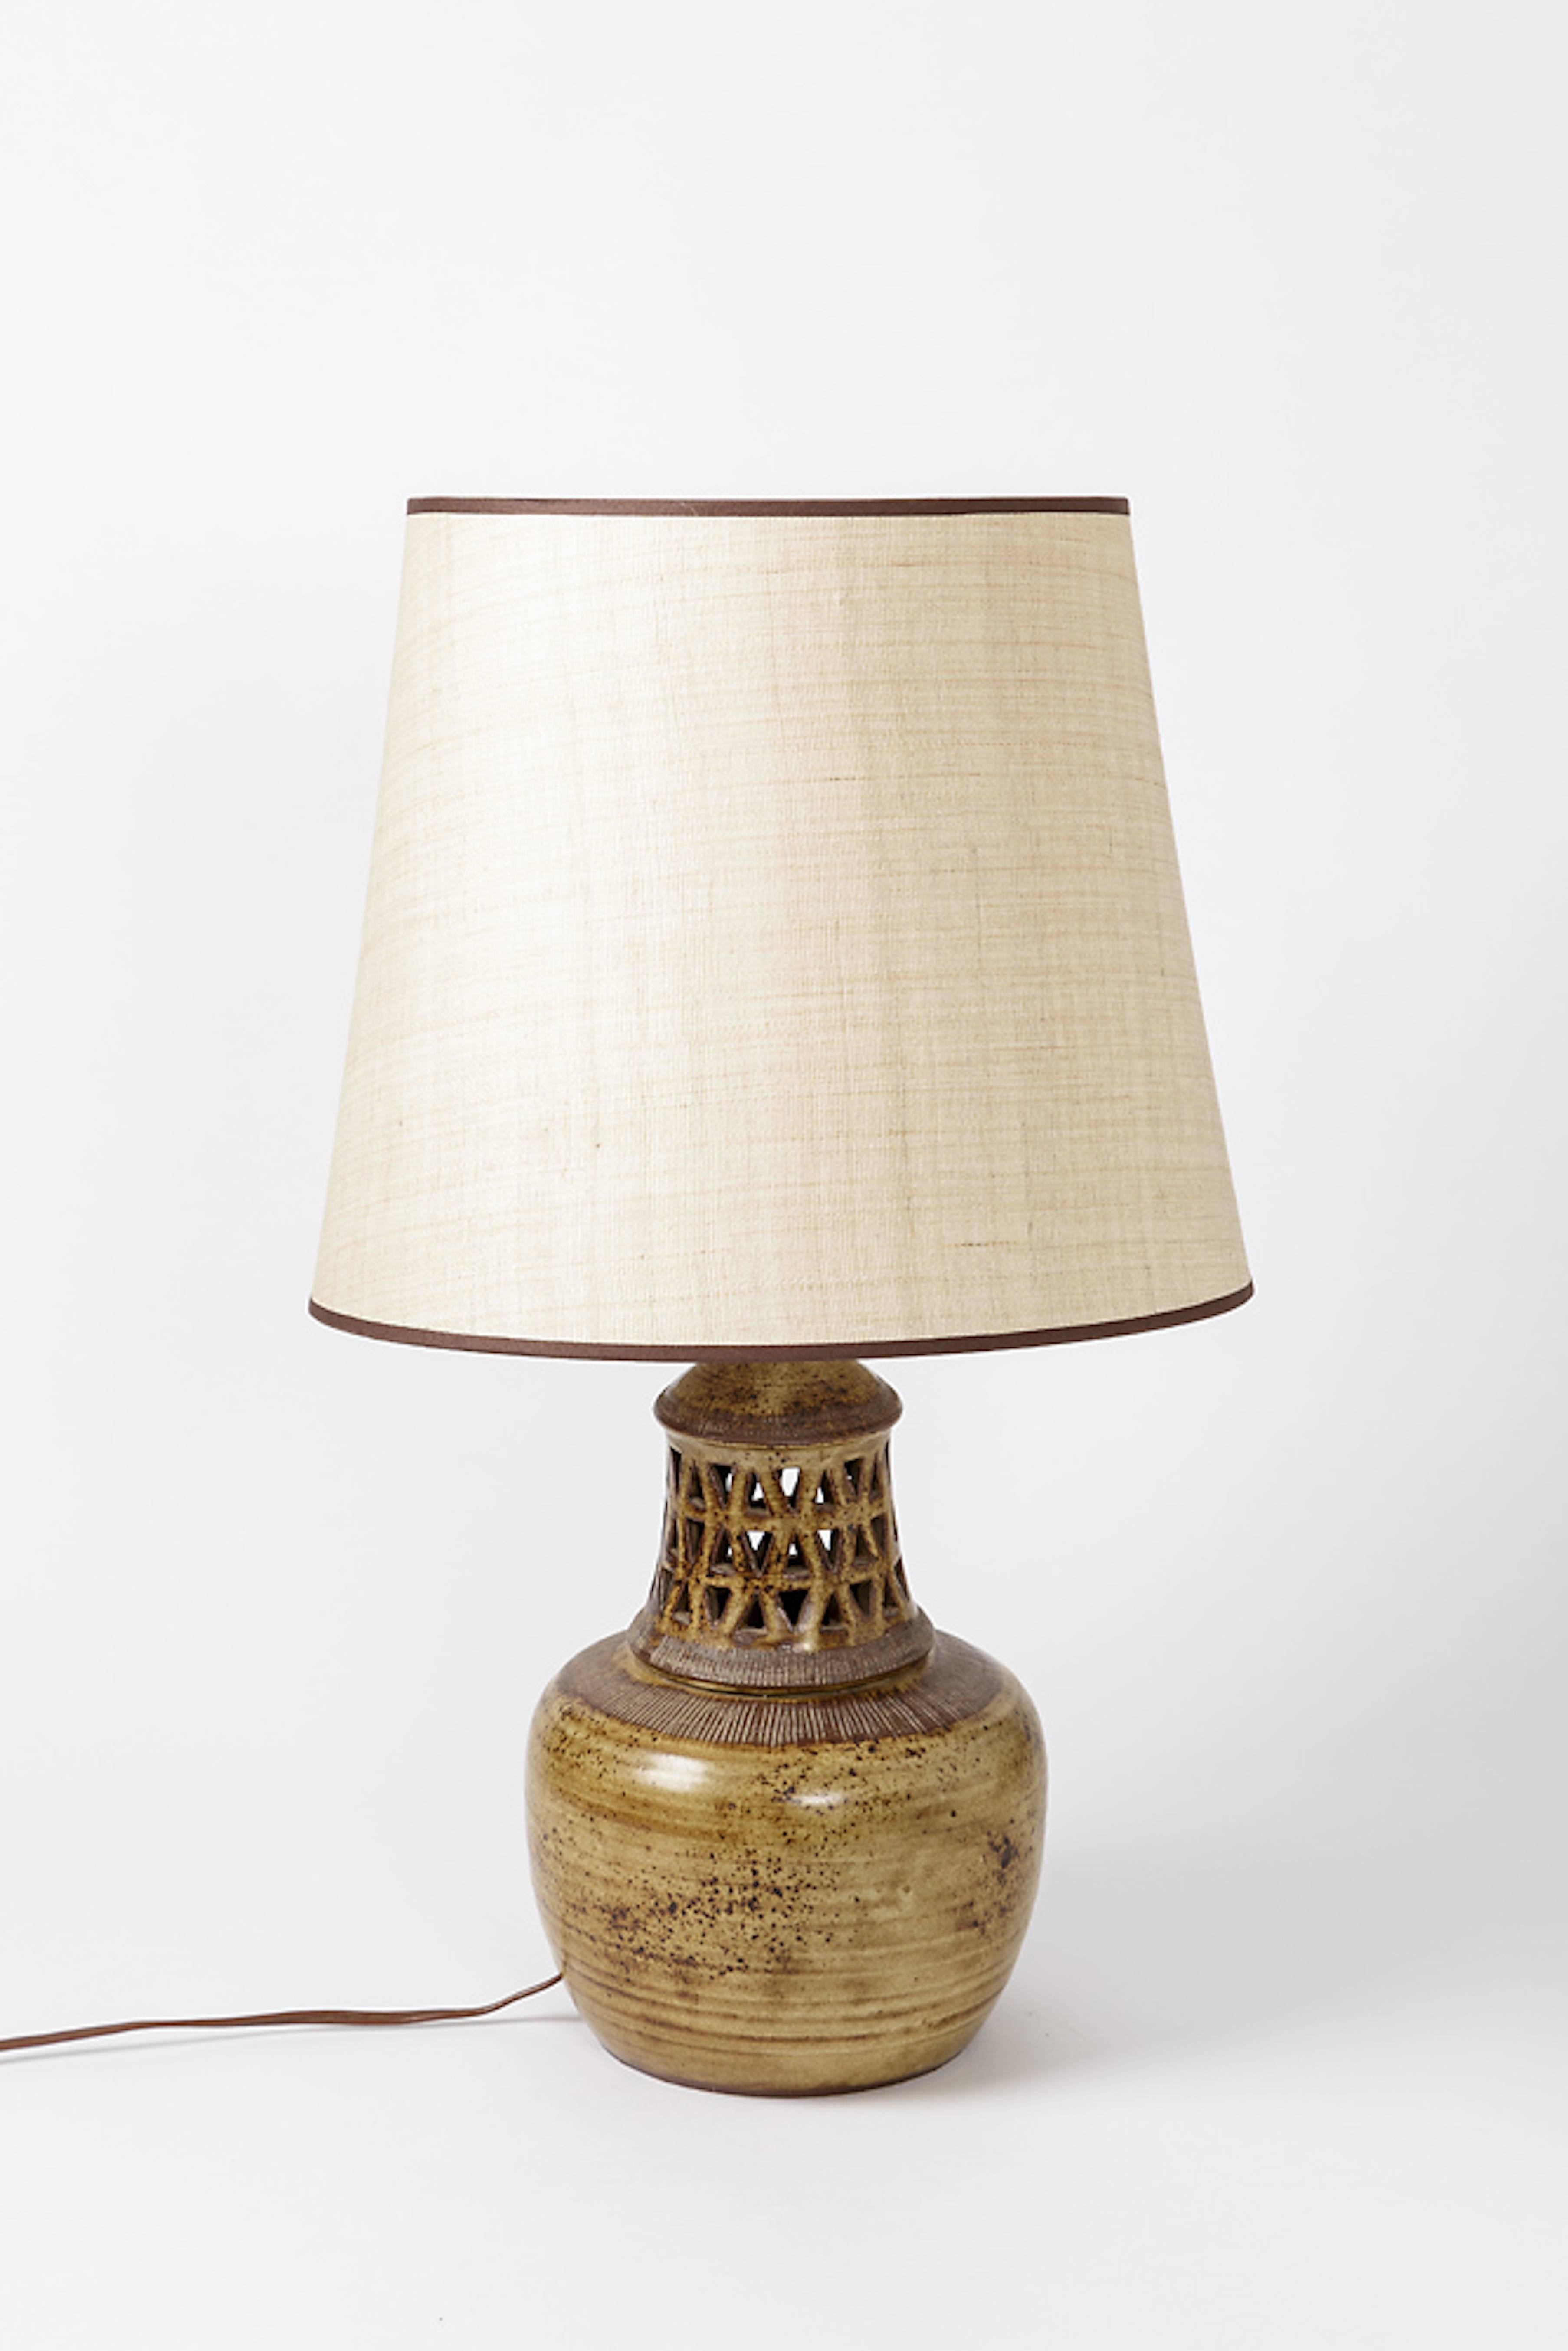 An elegant stoneware lamp, circa 1970.
Signed under the base.
Perfect original conditions.
Sold with lamp shade and new electrical system.

Dimensions with lamp shade / height: 24' 1/2 x 14' 1/2 inch.

Dimensions without lamp shade / height: